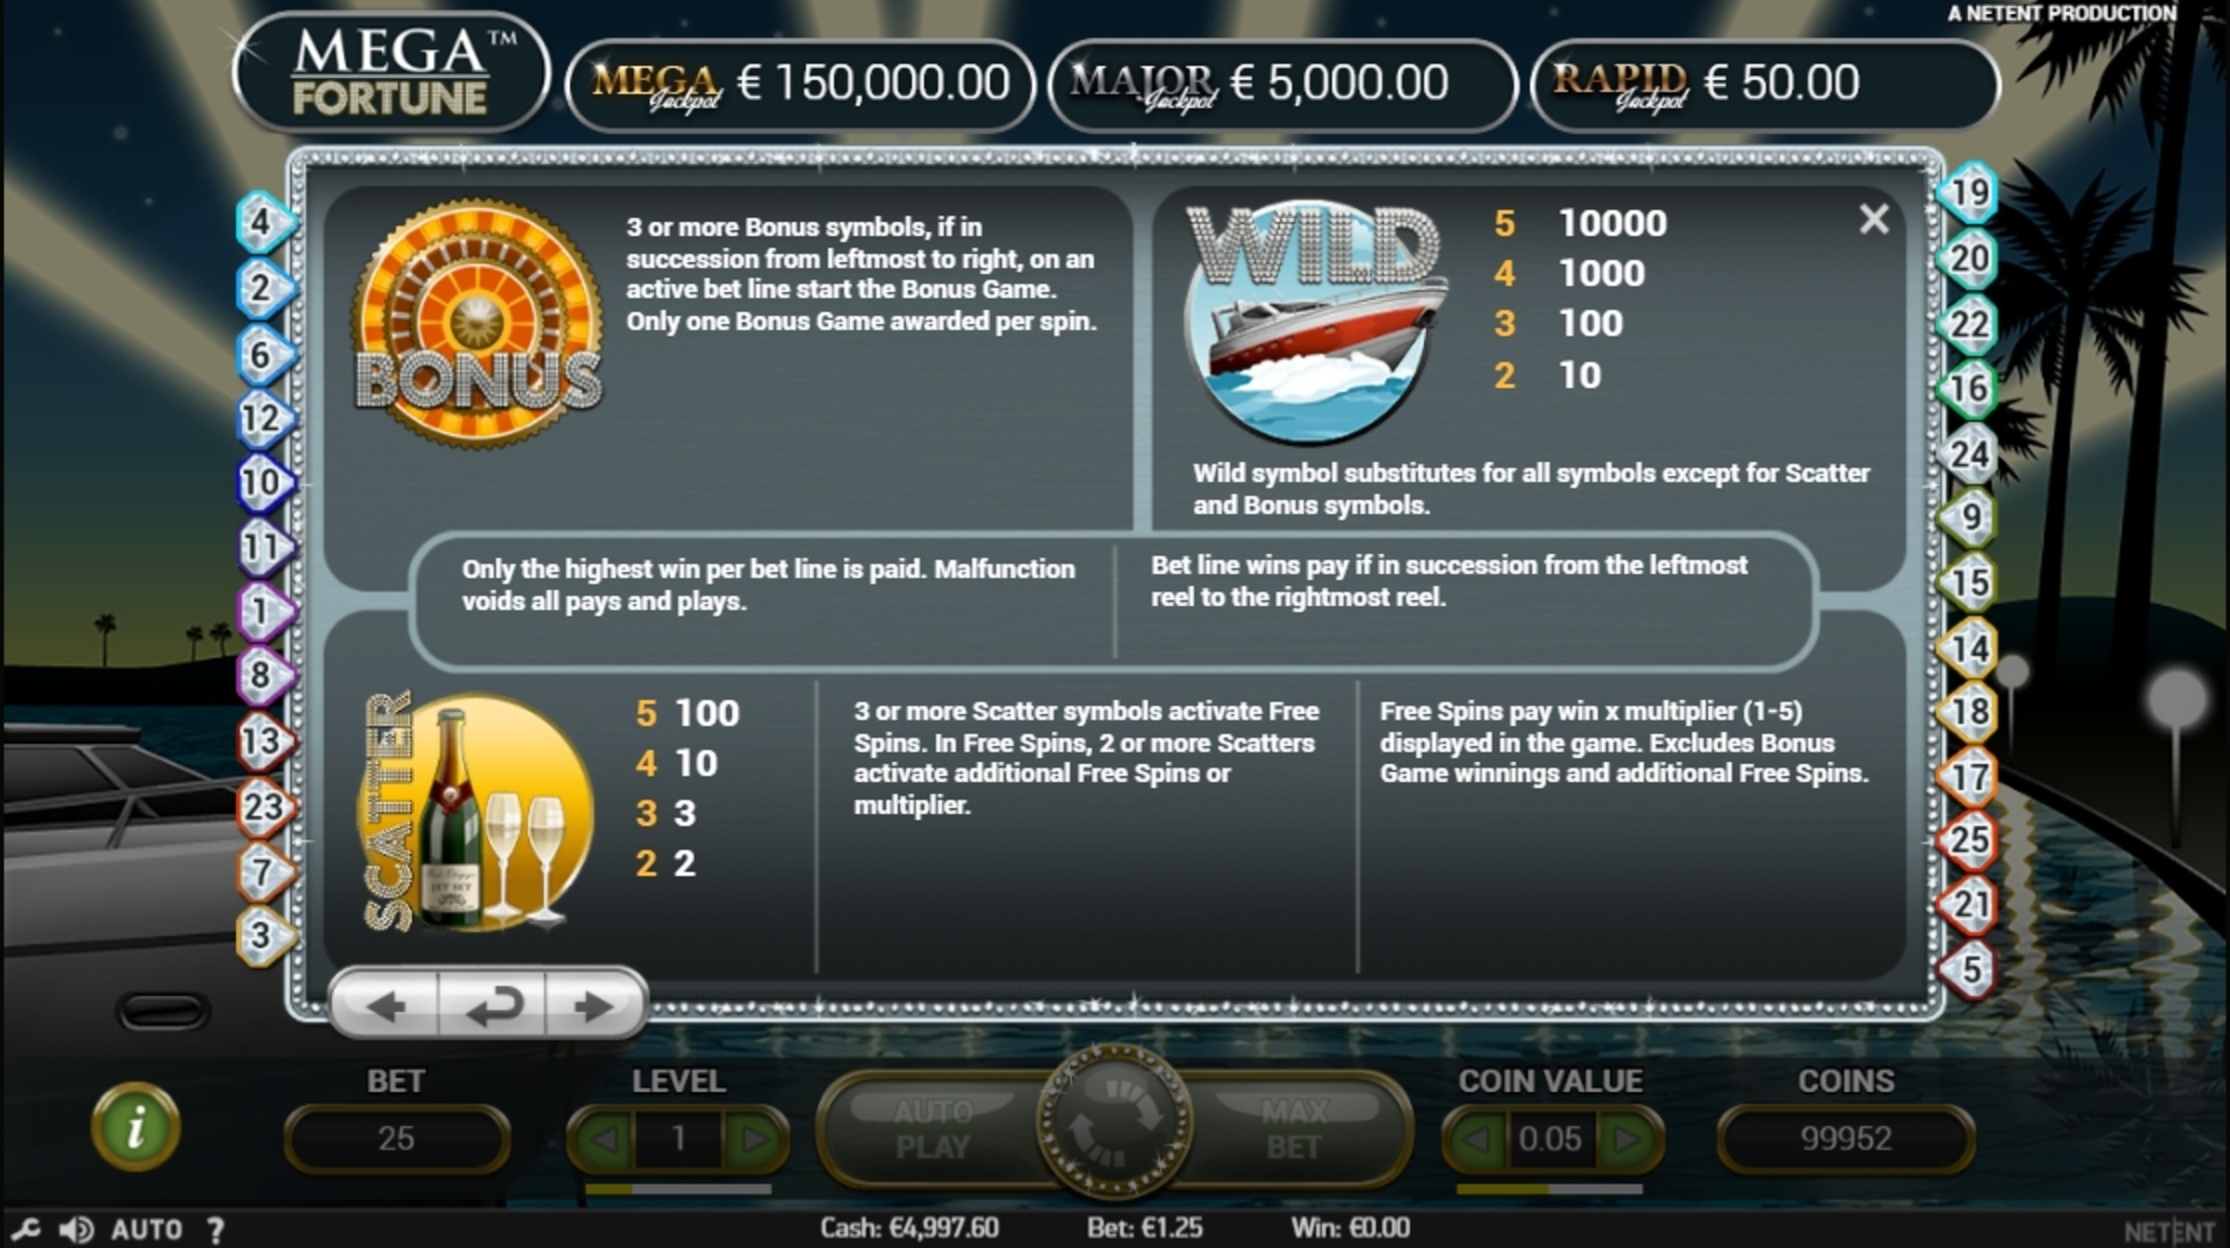 Info of Mega Fortune Slot Game by NetEnt